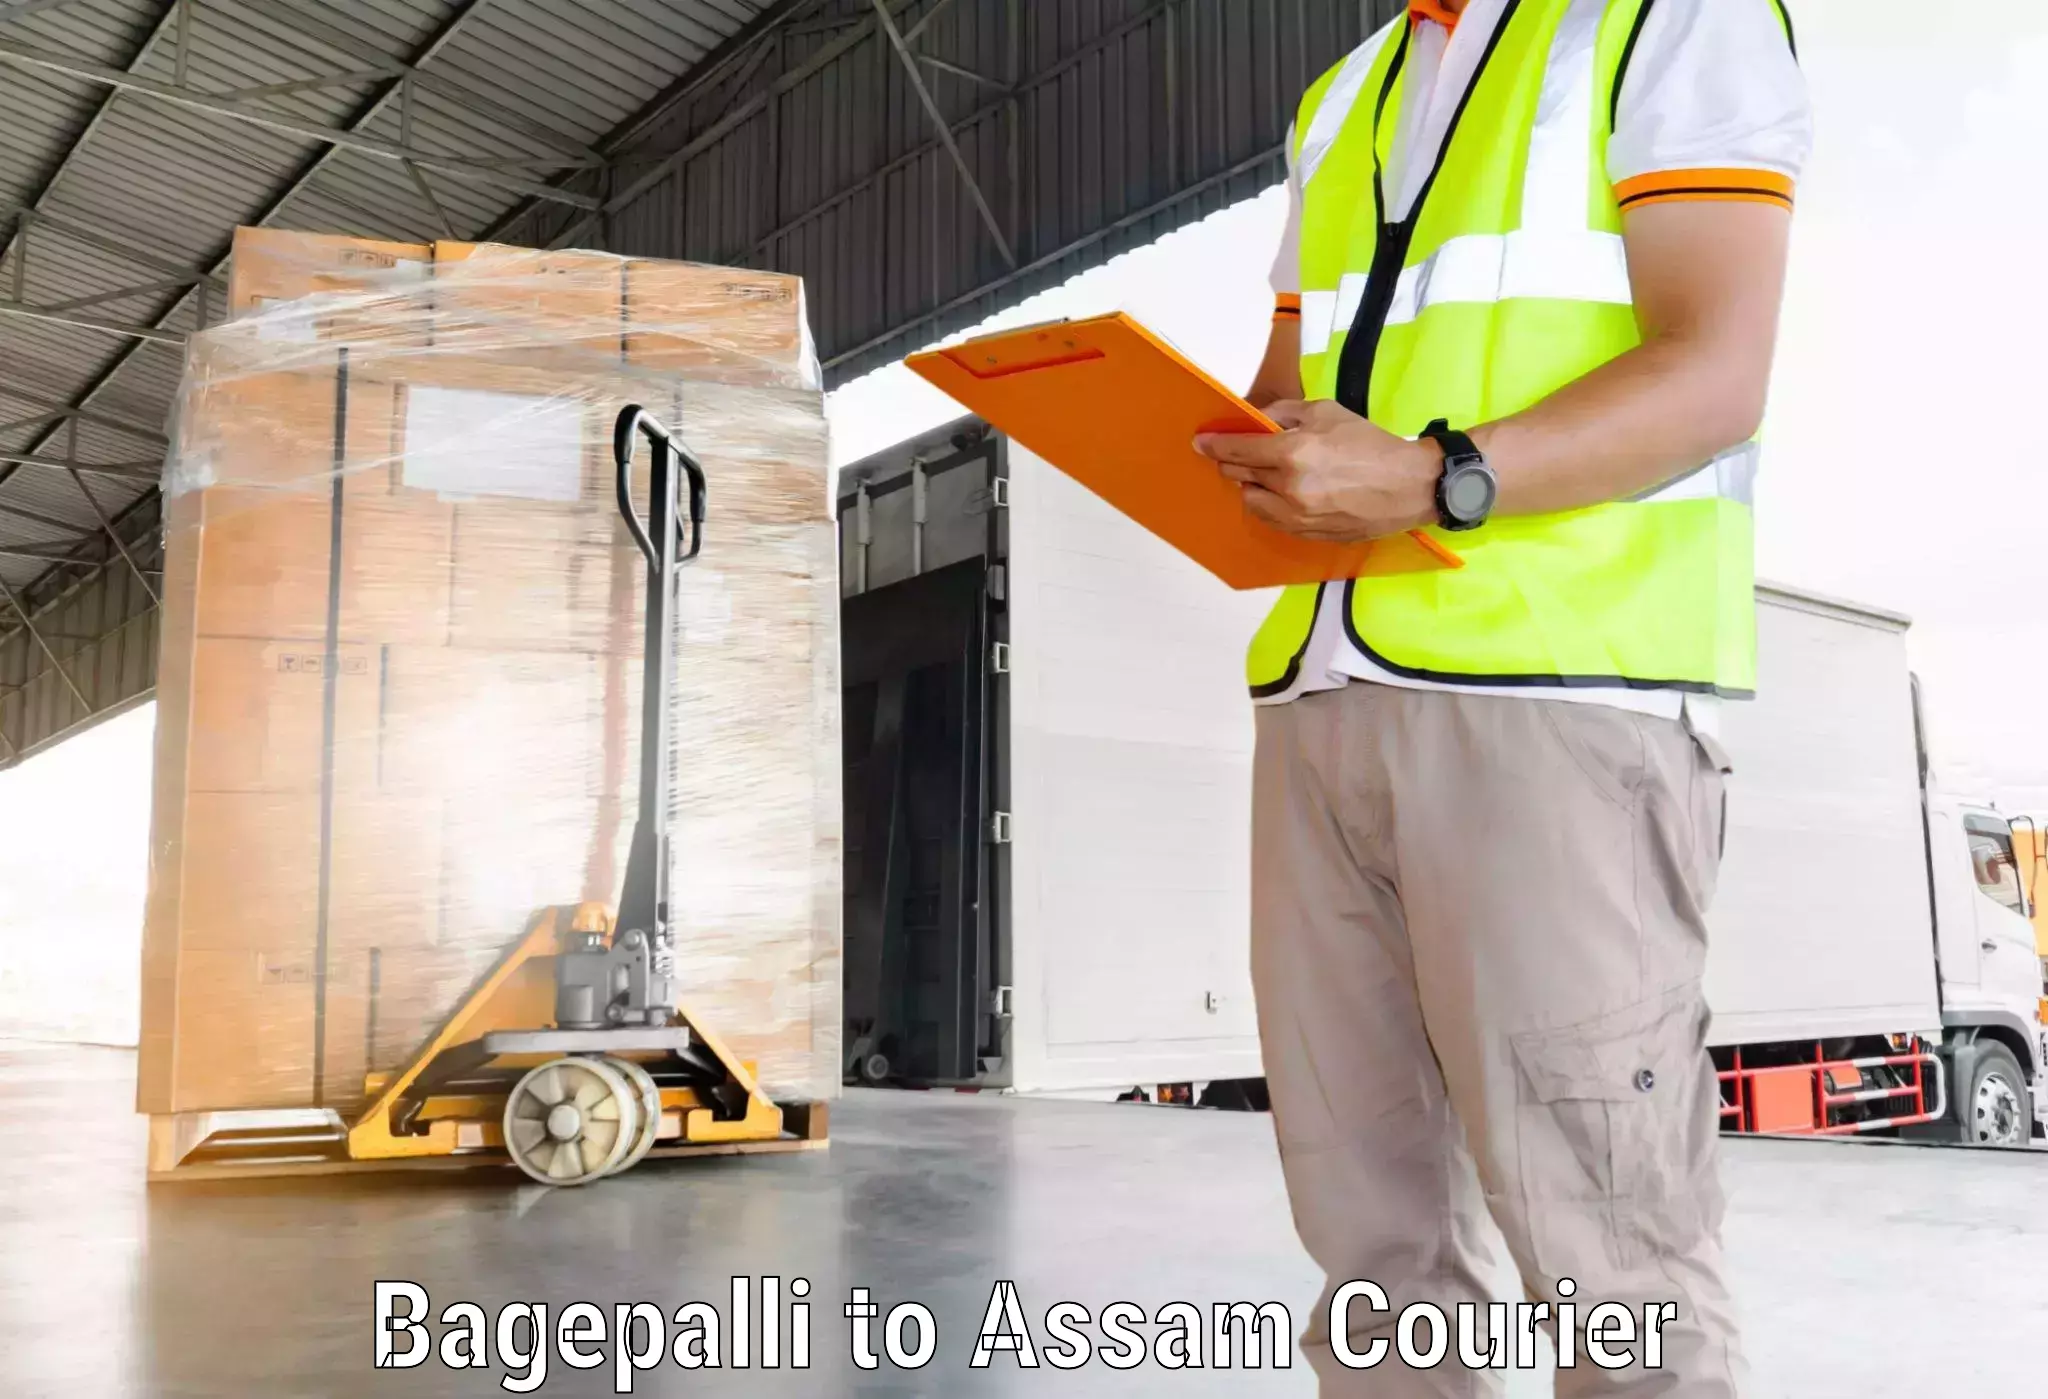 State-of-the-art courier technology Bagepalli to Assam